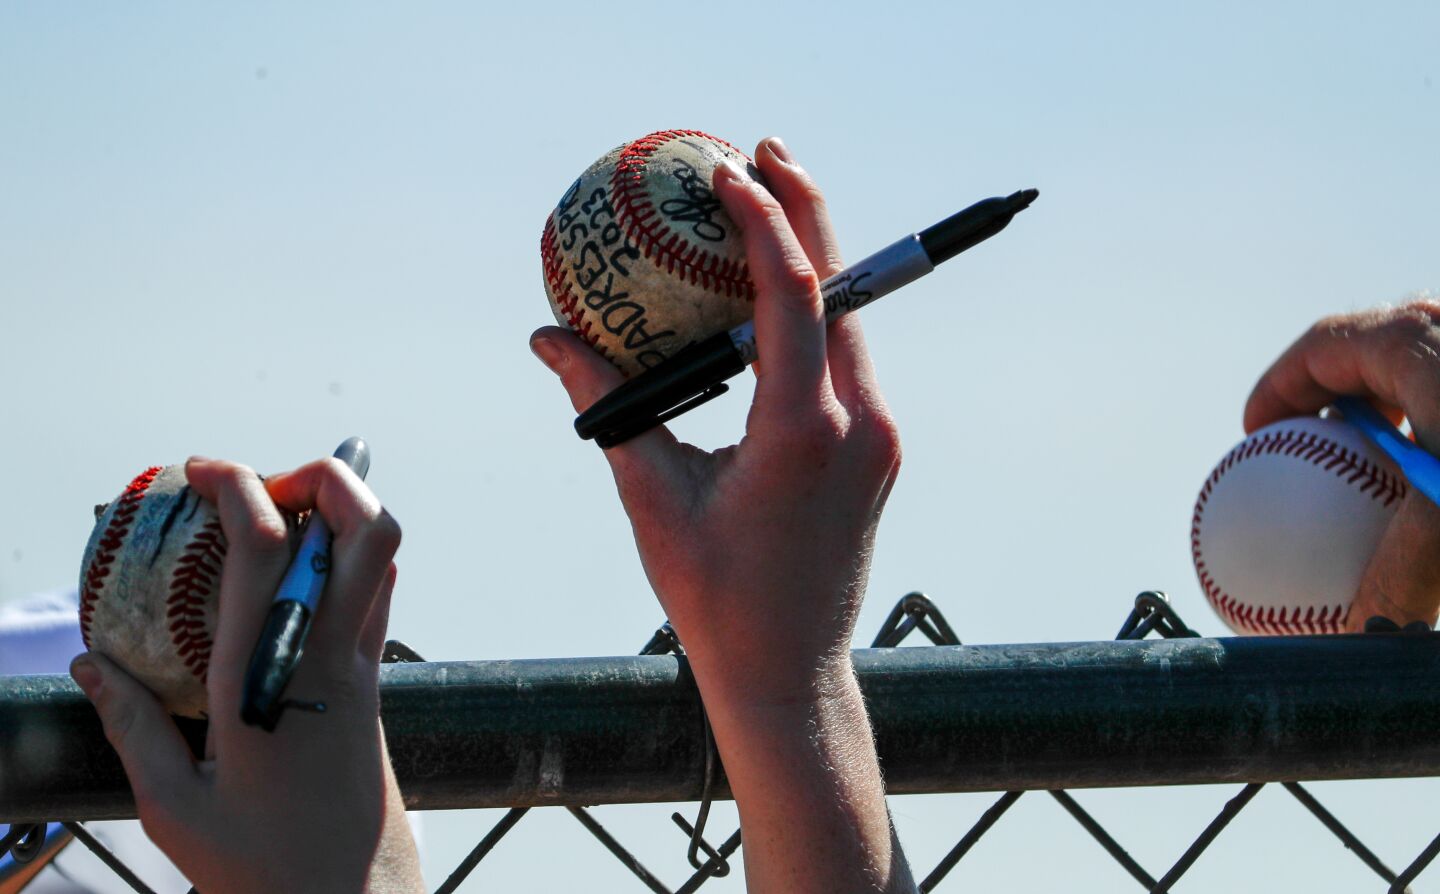 Fans hold out balls to get autographed during a spring training practice at the Peoria Sports Complex on Monday, Feb. 20, 2023 in Peoria, AZ.